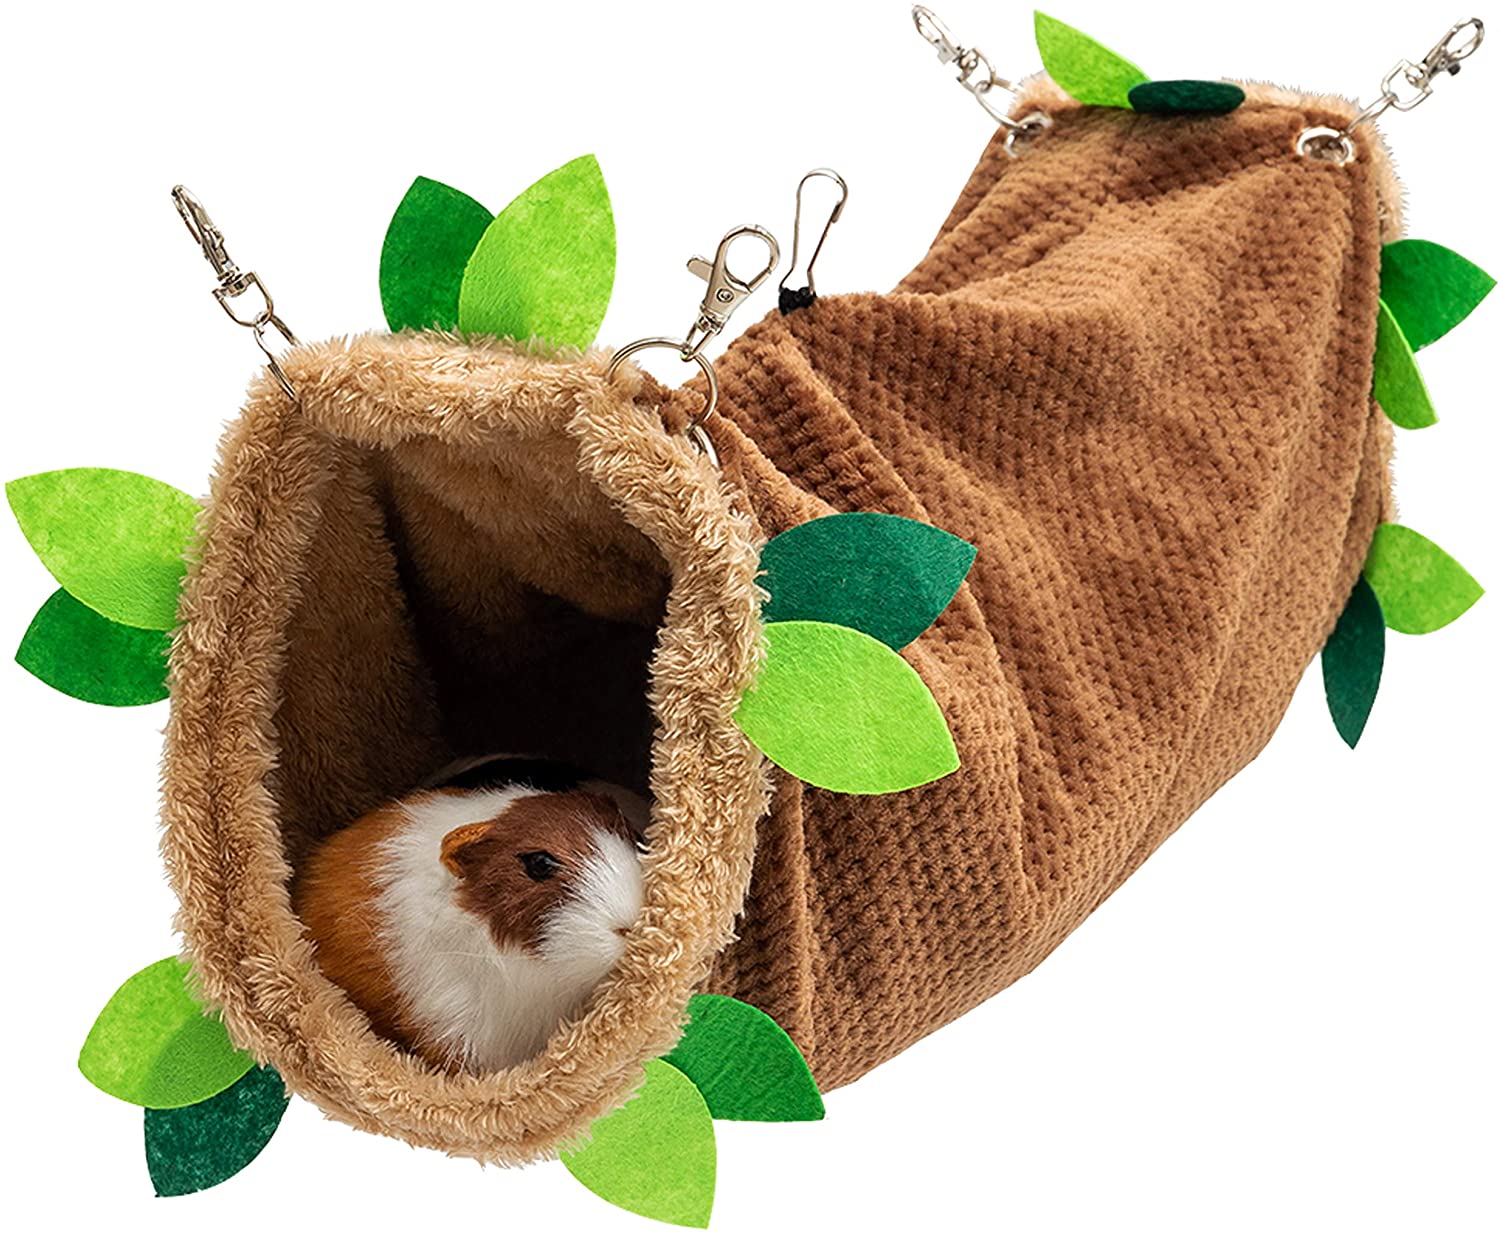 4 Pieces Guinea Pig Mat Bed Double Sided Guinea Pig Winter Warm and Summer Cool Hamster Cushion Sleeping Pad for Bunny Hamster Guinea Pig Squirrel Hedgehog 